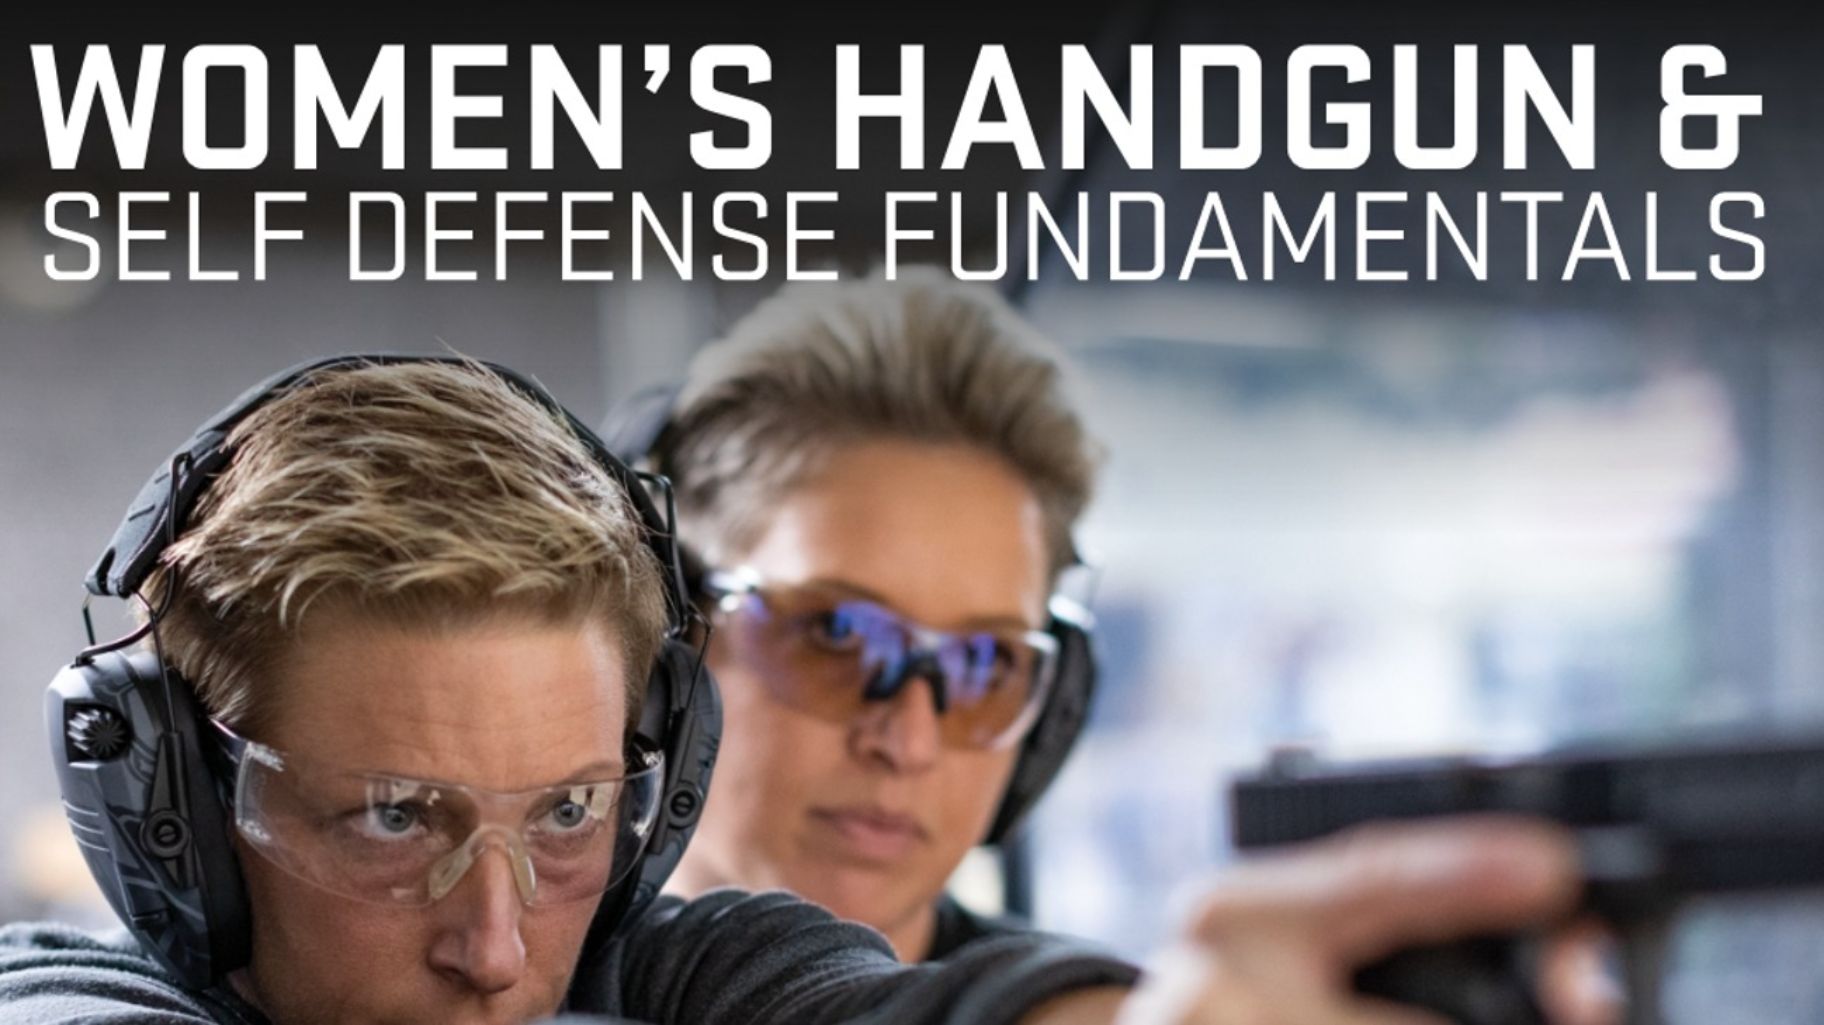 Throwback Thursday: Best Concealed Carry Options for Female Shooters - The  Shooter's Log